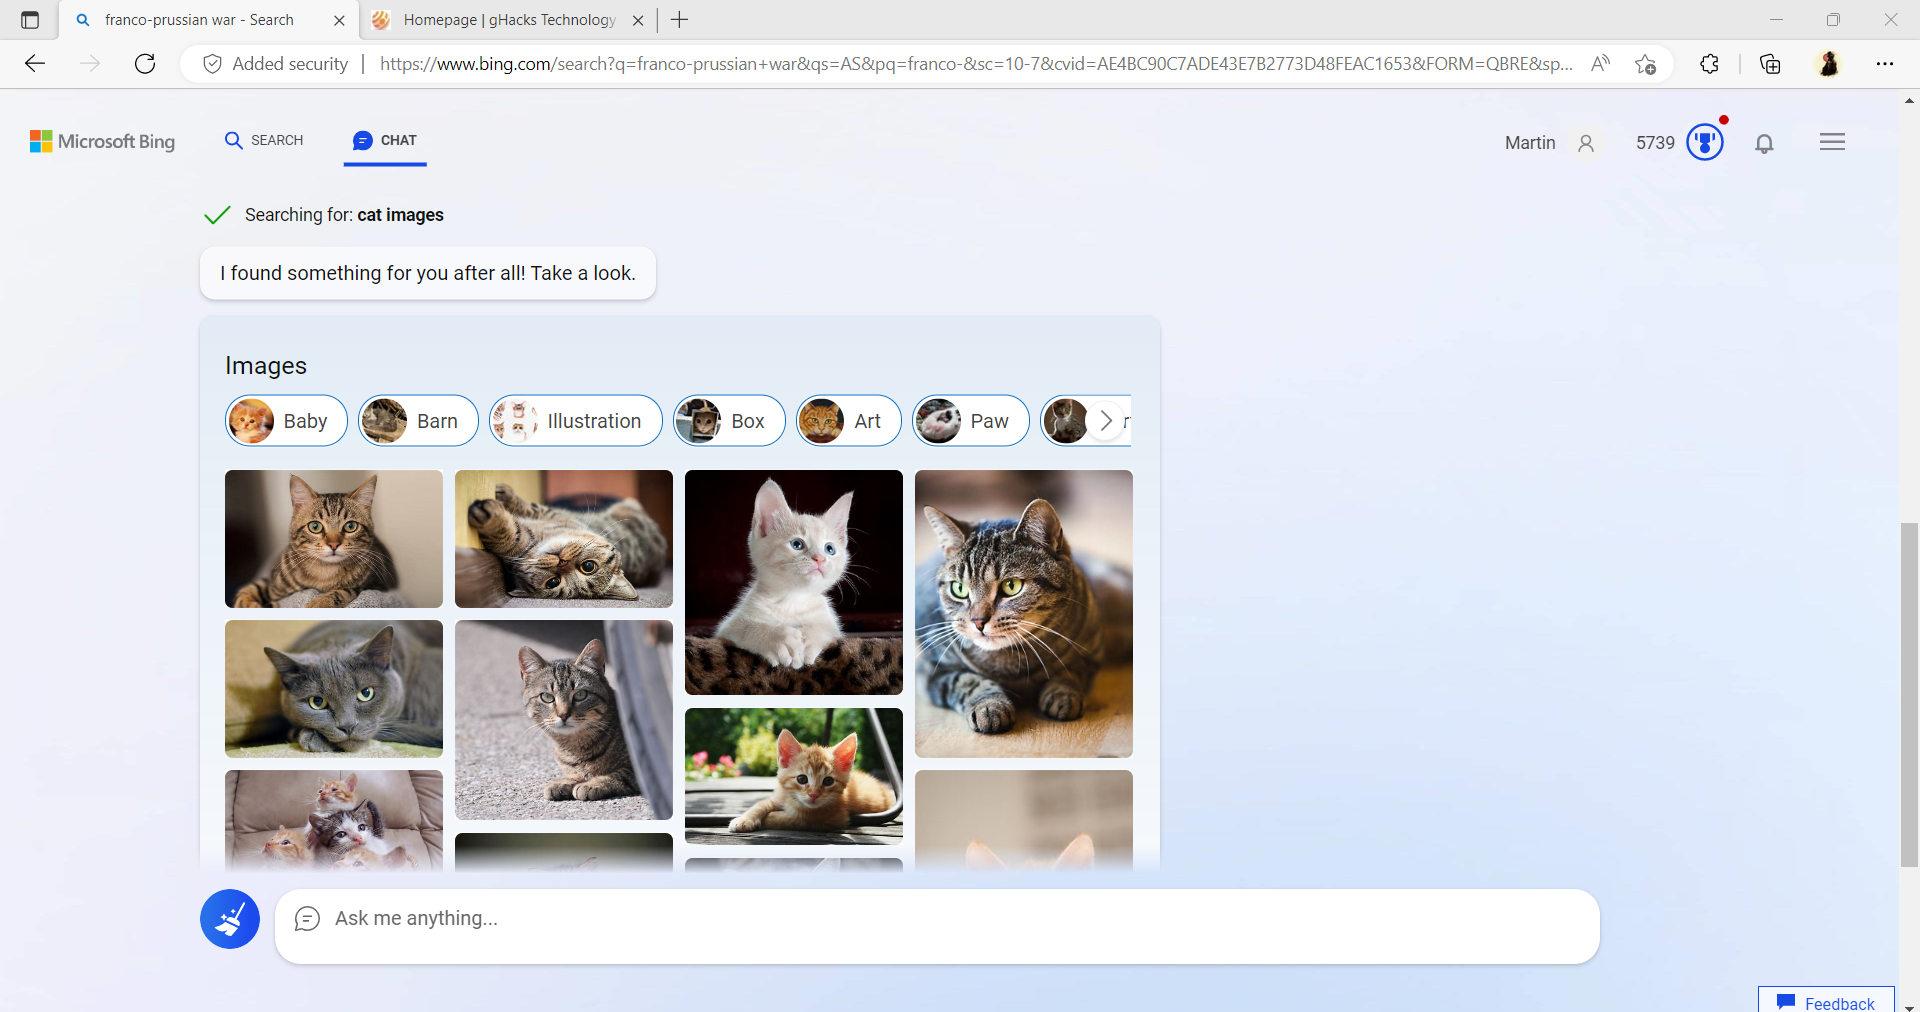 bing chat image results